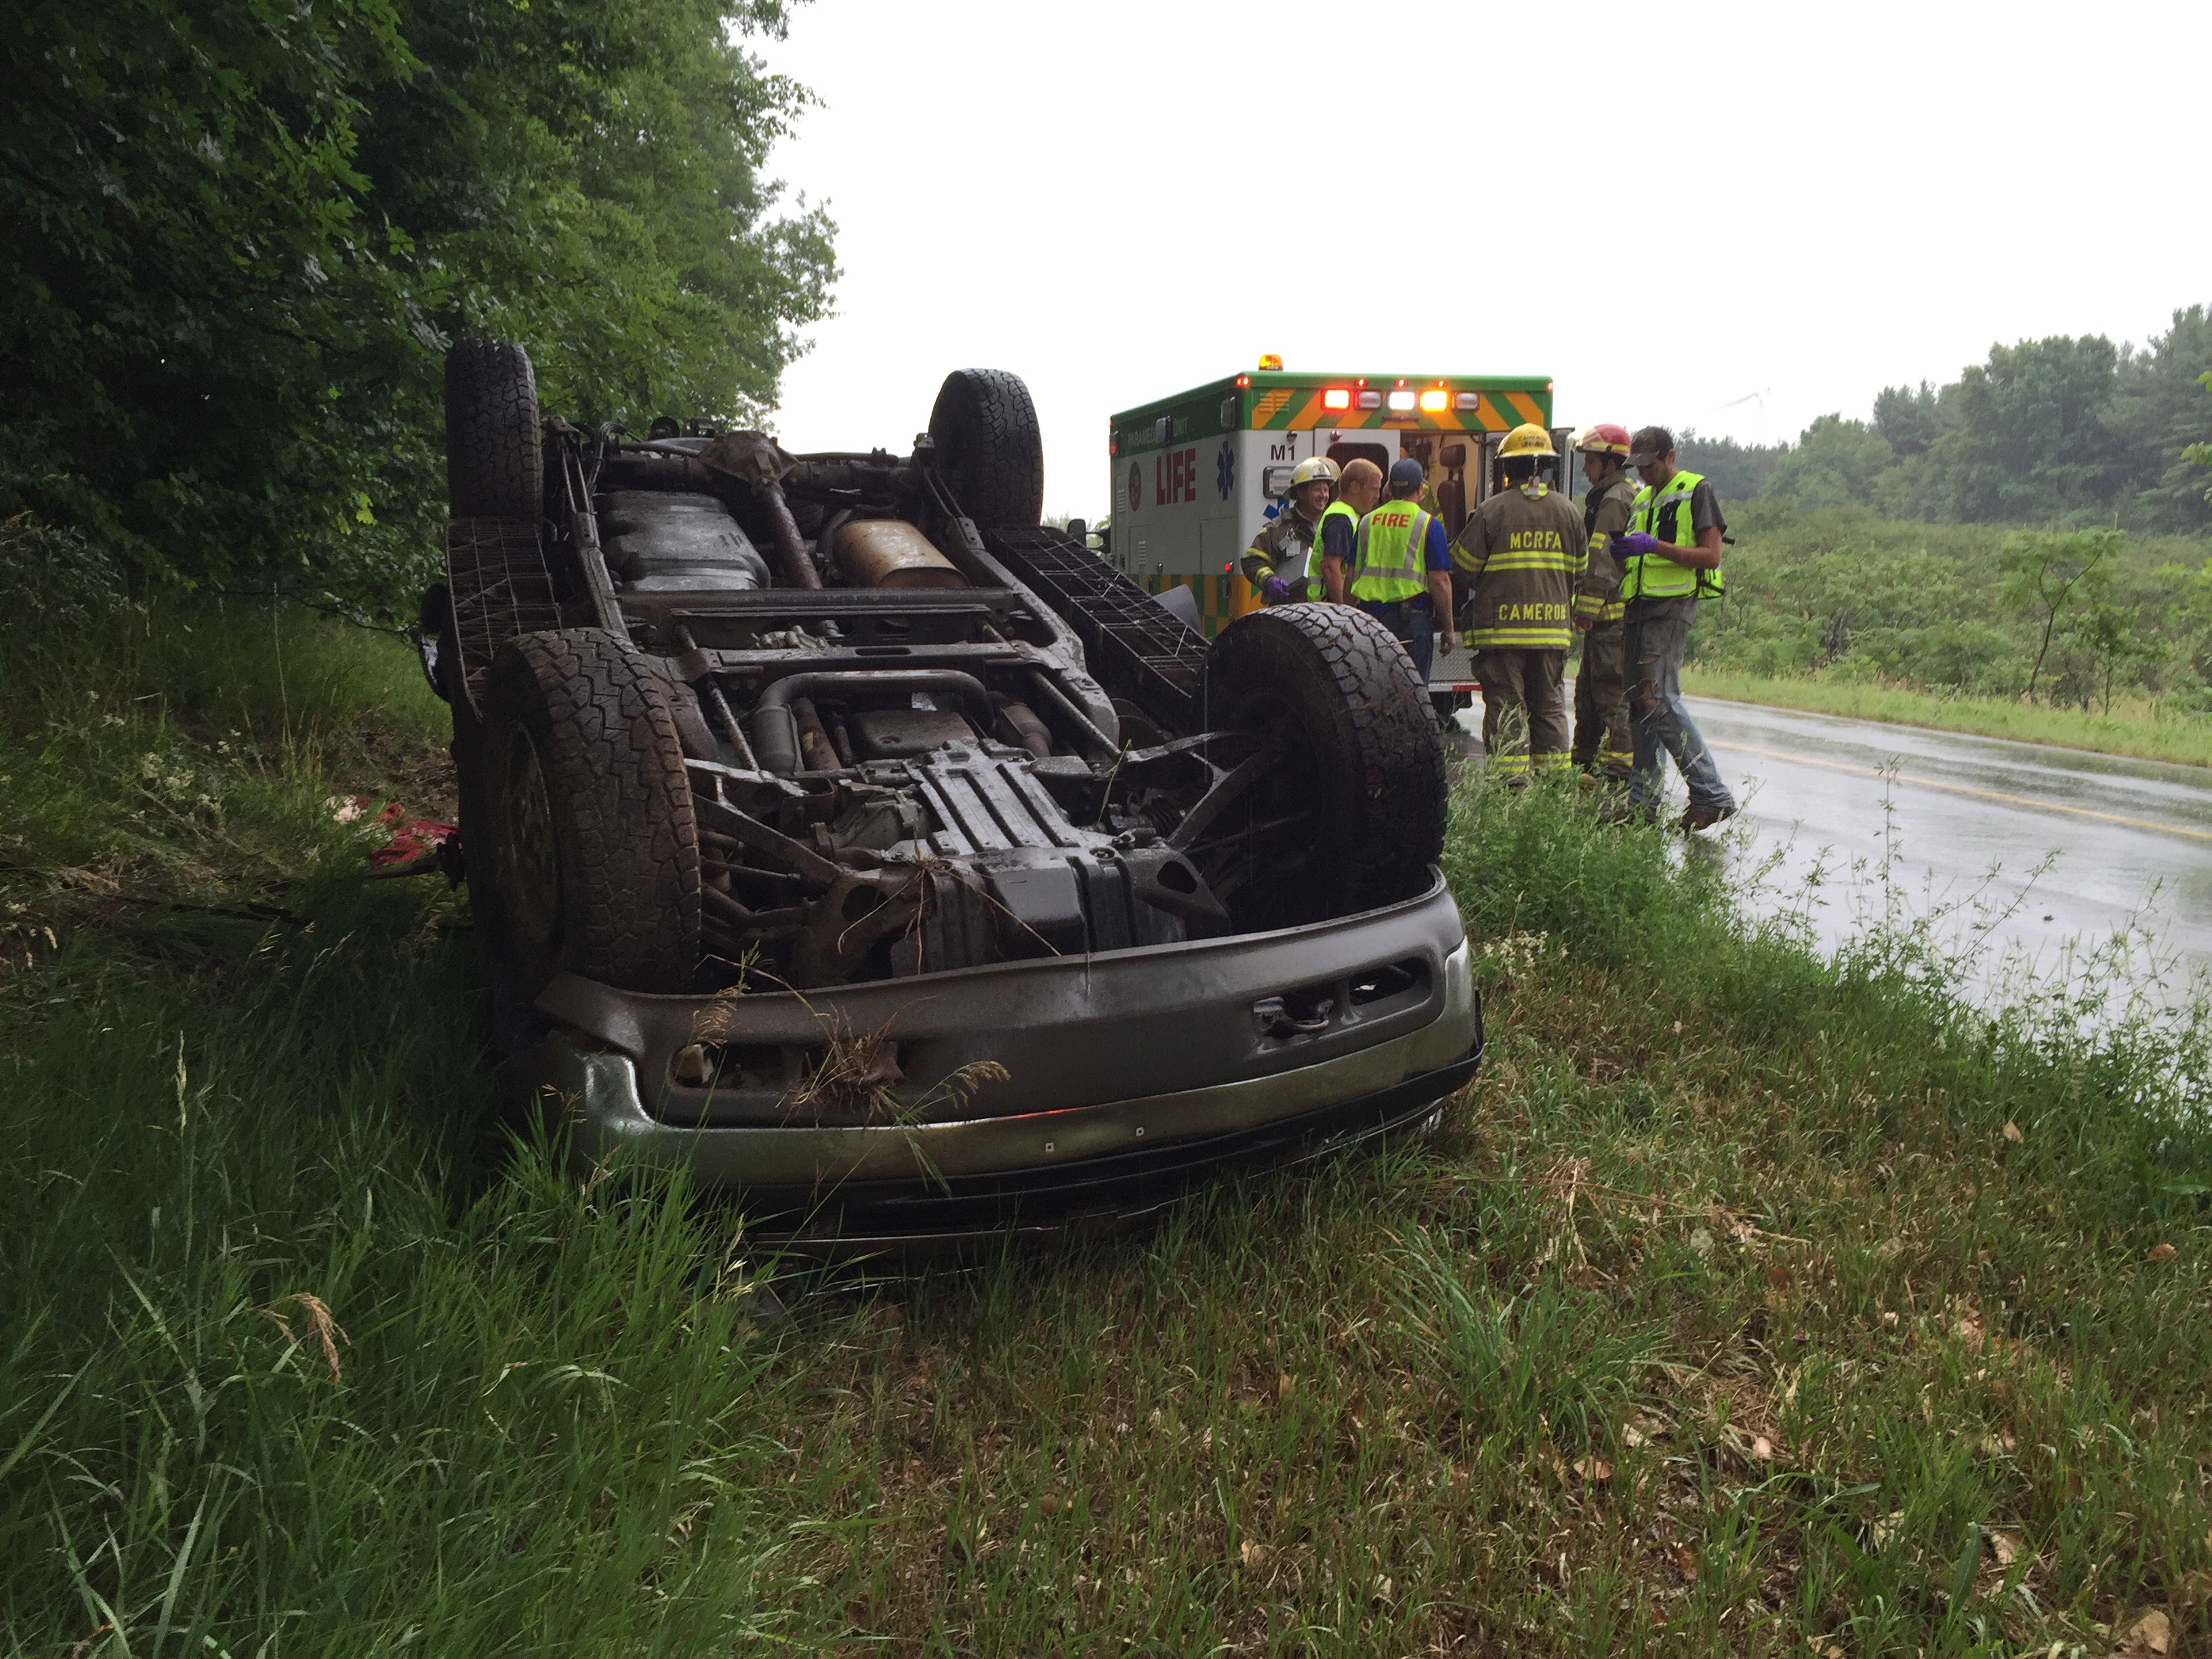 Driver receives minor injuries after rollover.